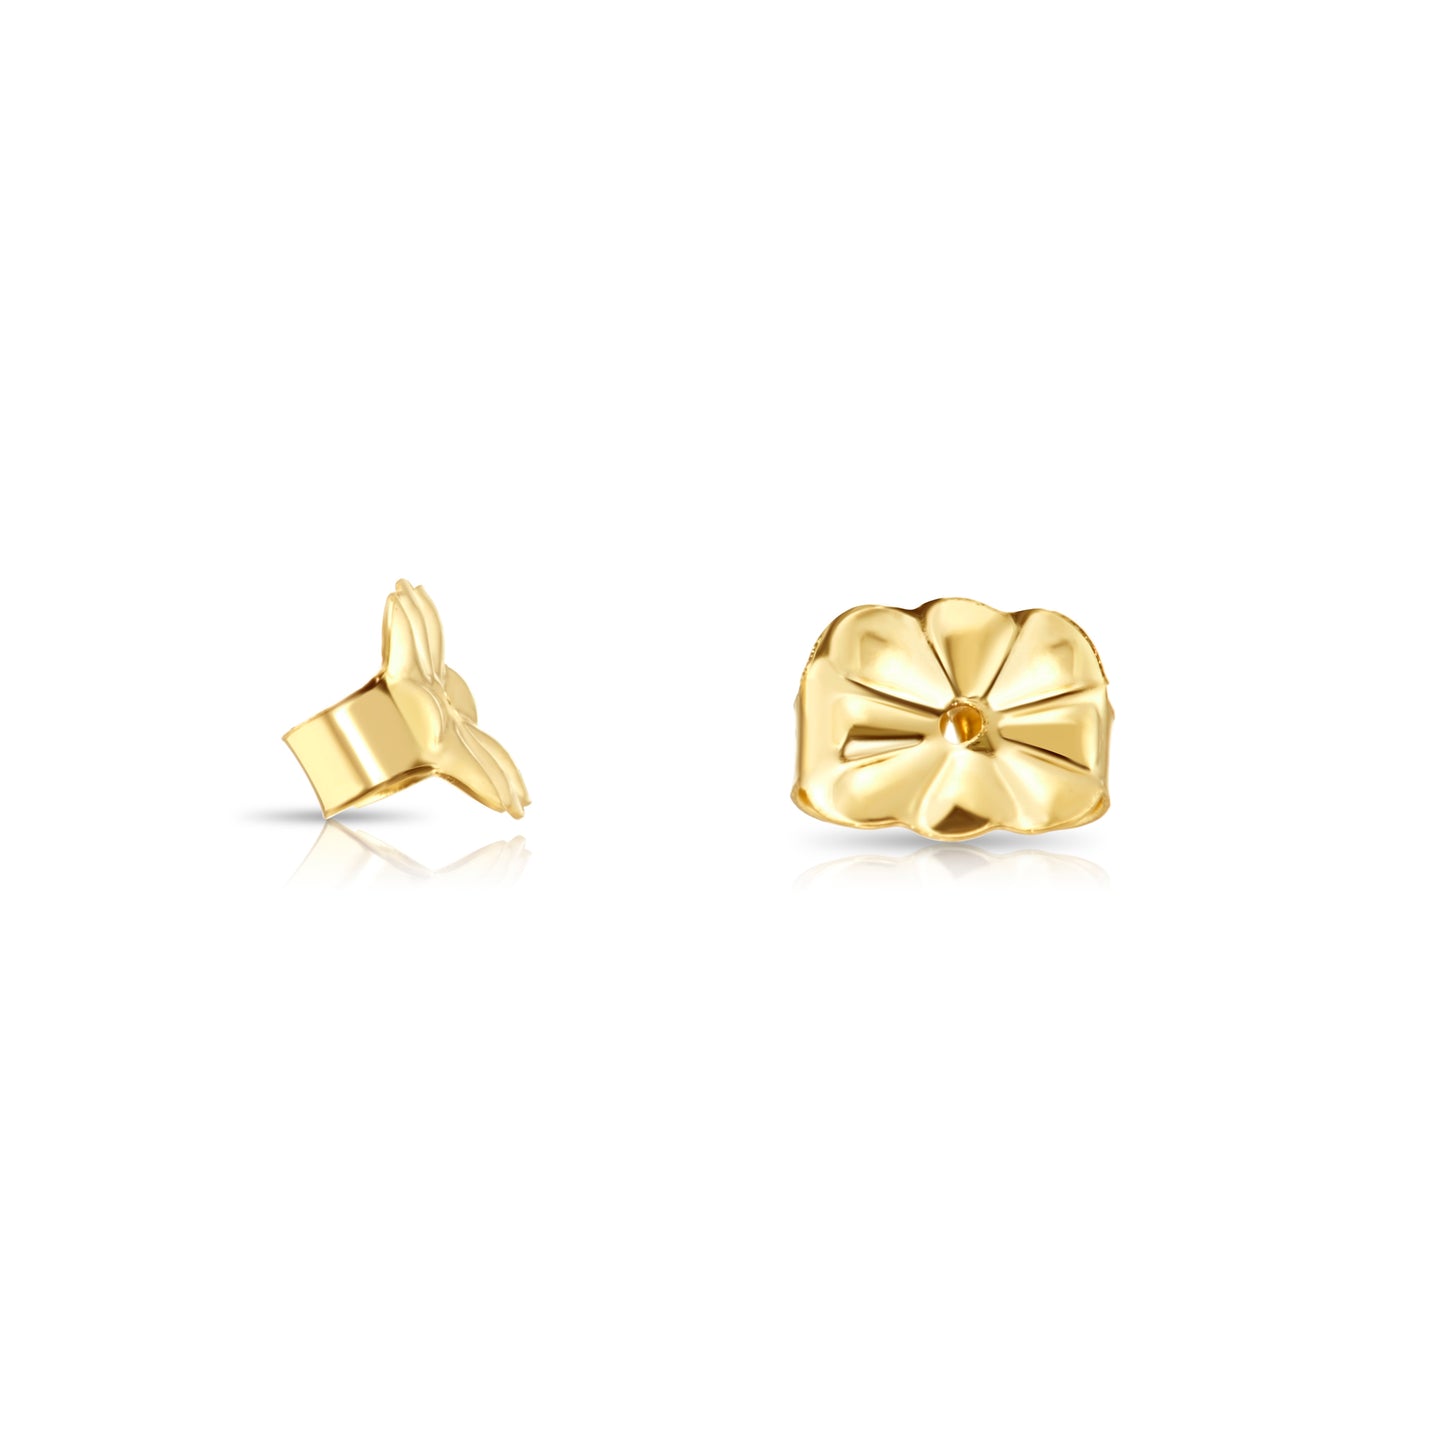 14K Yellow Gold Replacement Push Backings, Made by TILO Jewelry